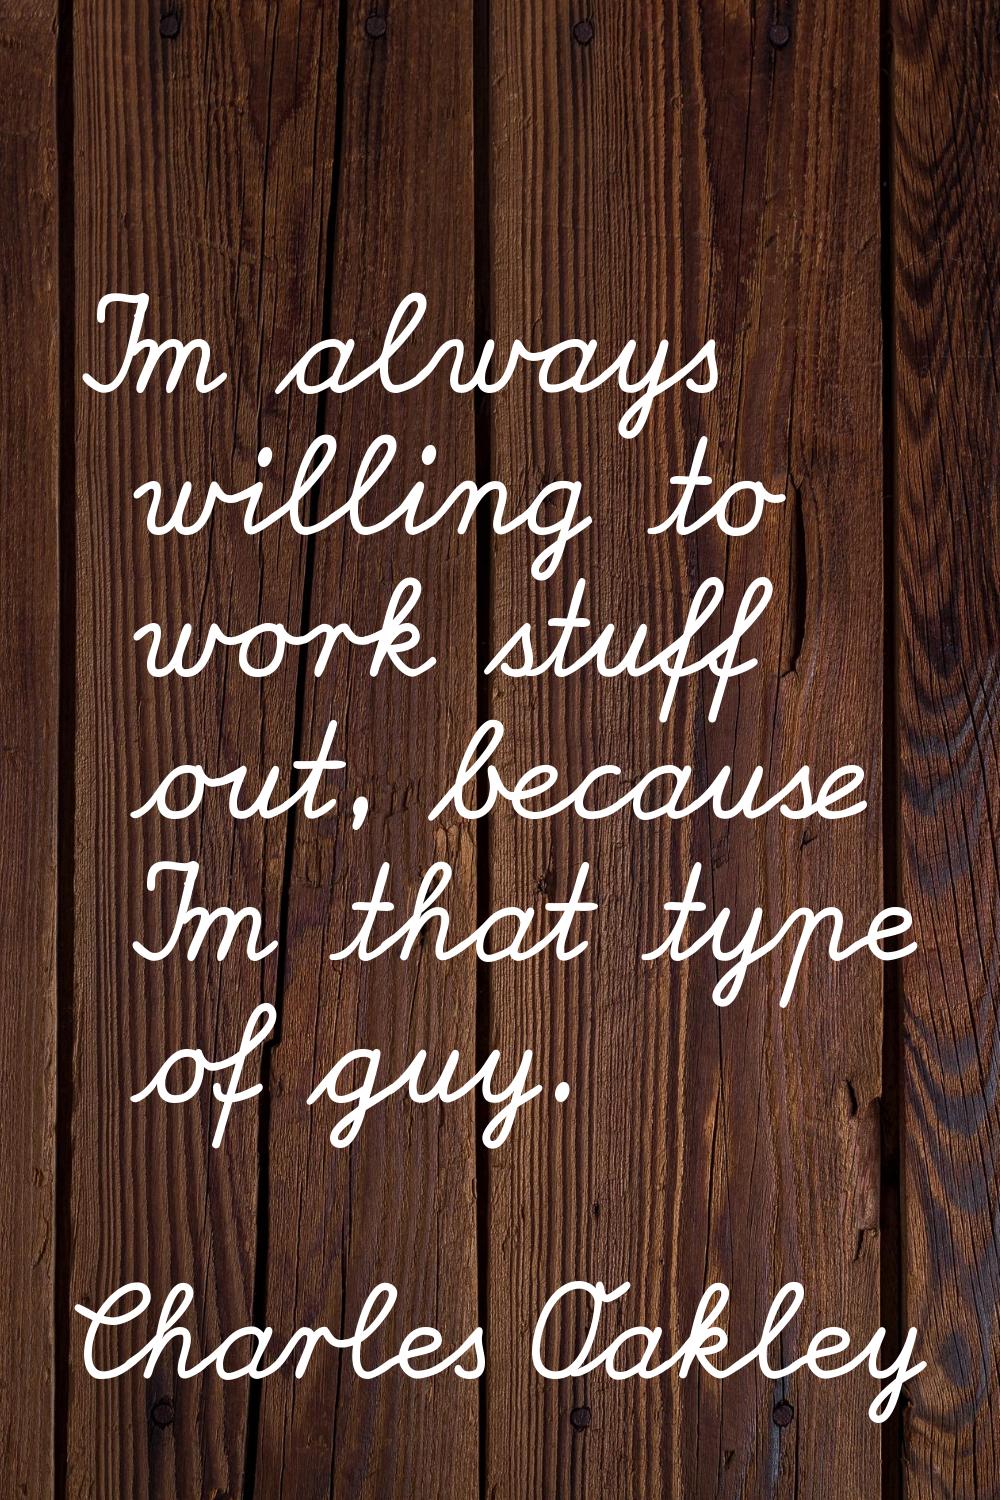 I'm always willing to work stuff out, because I'm that type of guy.